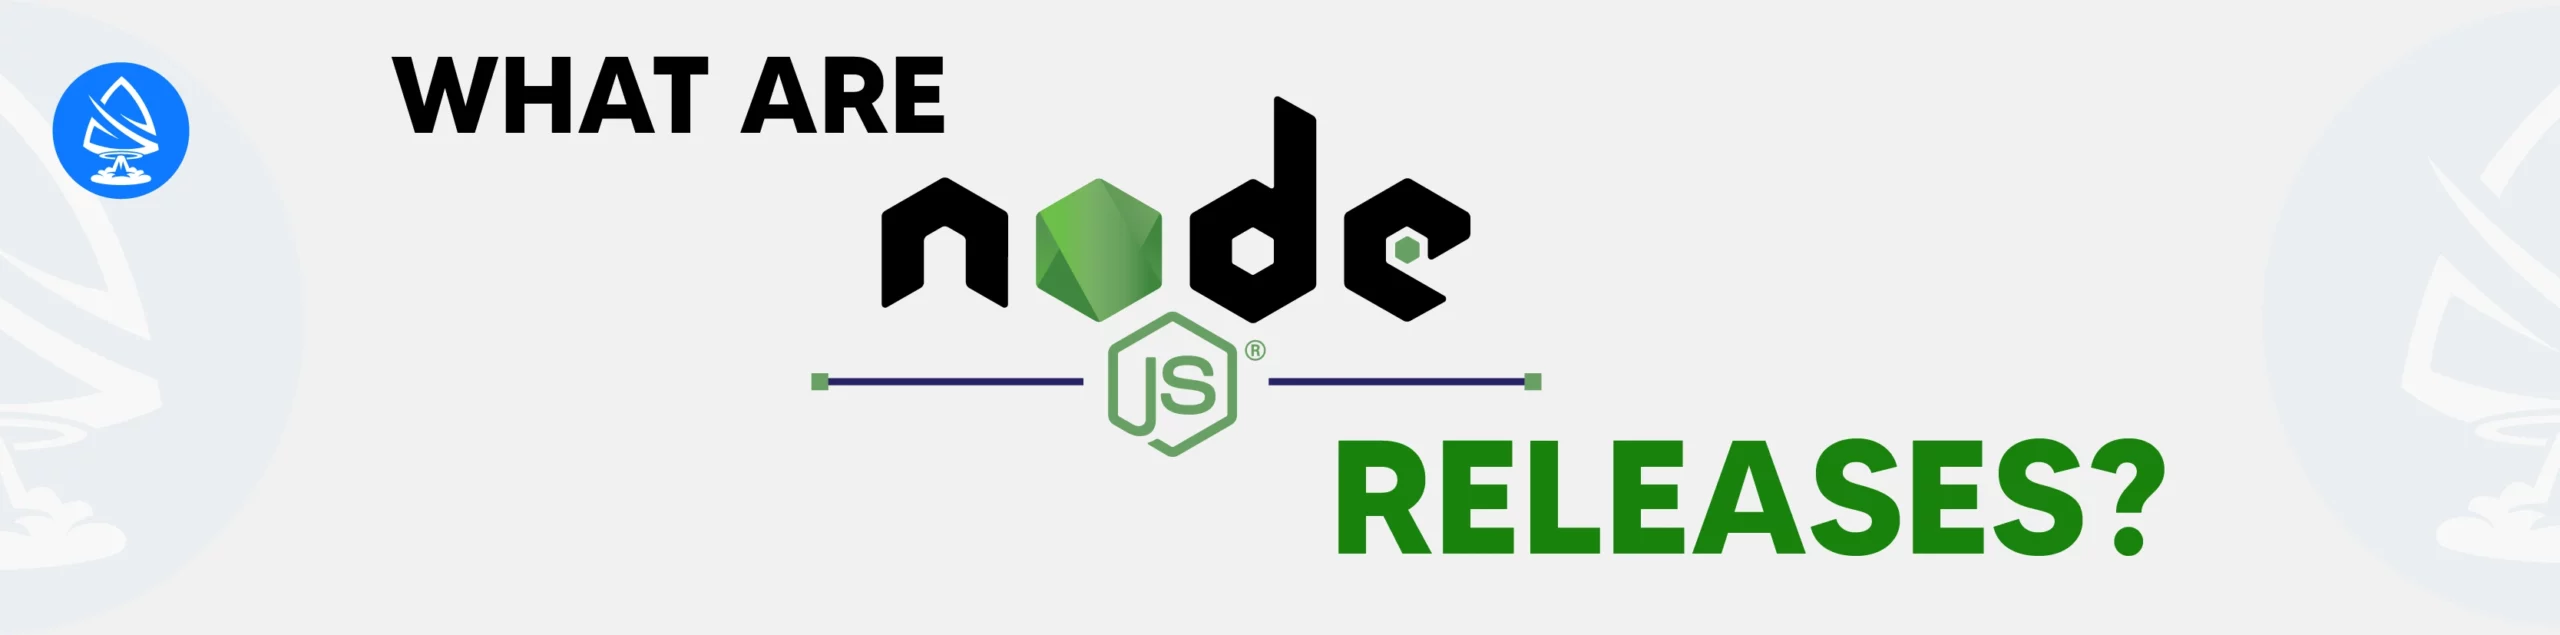 What are node releases